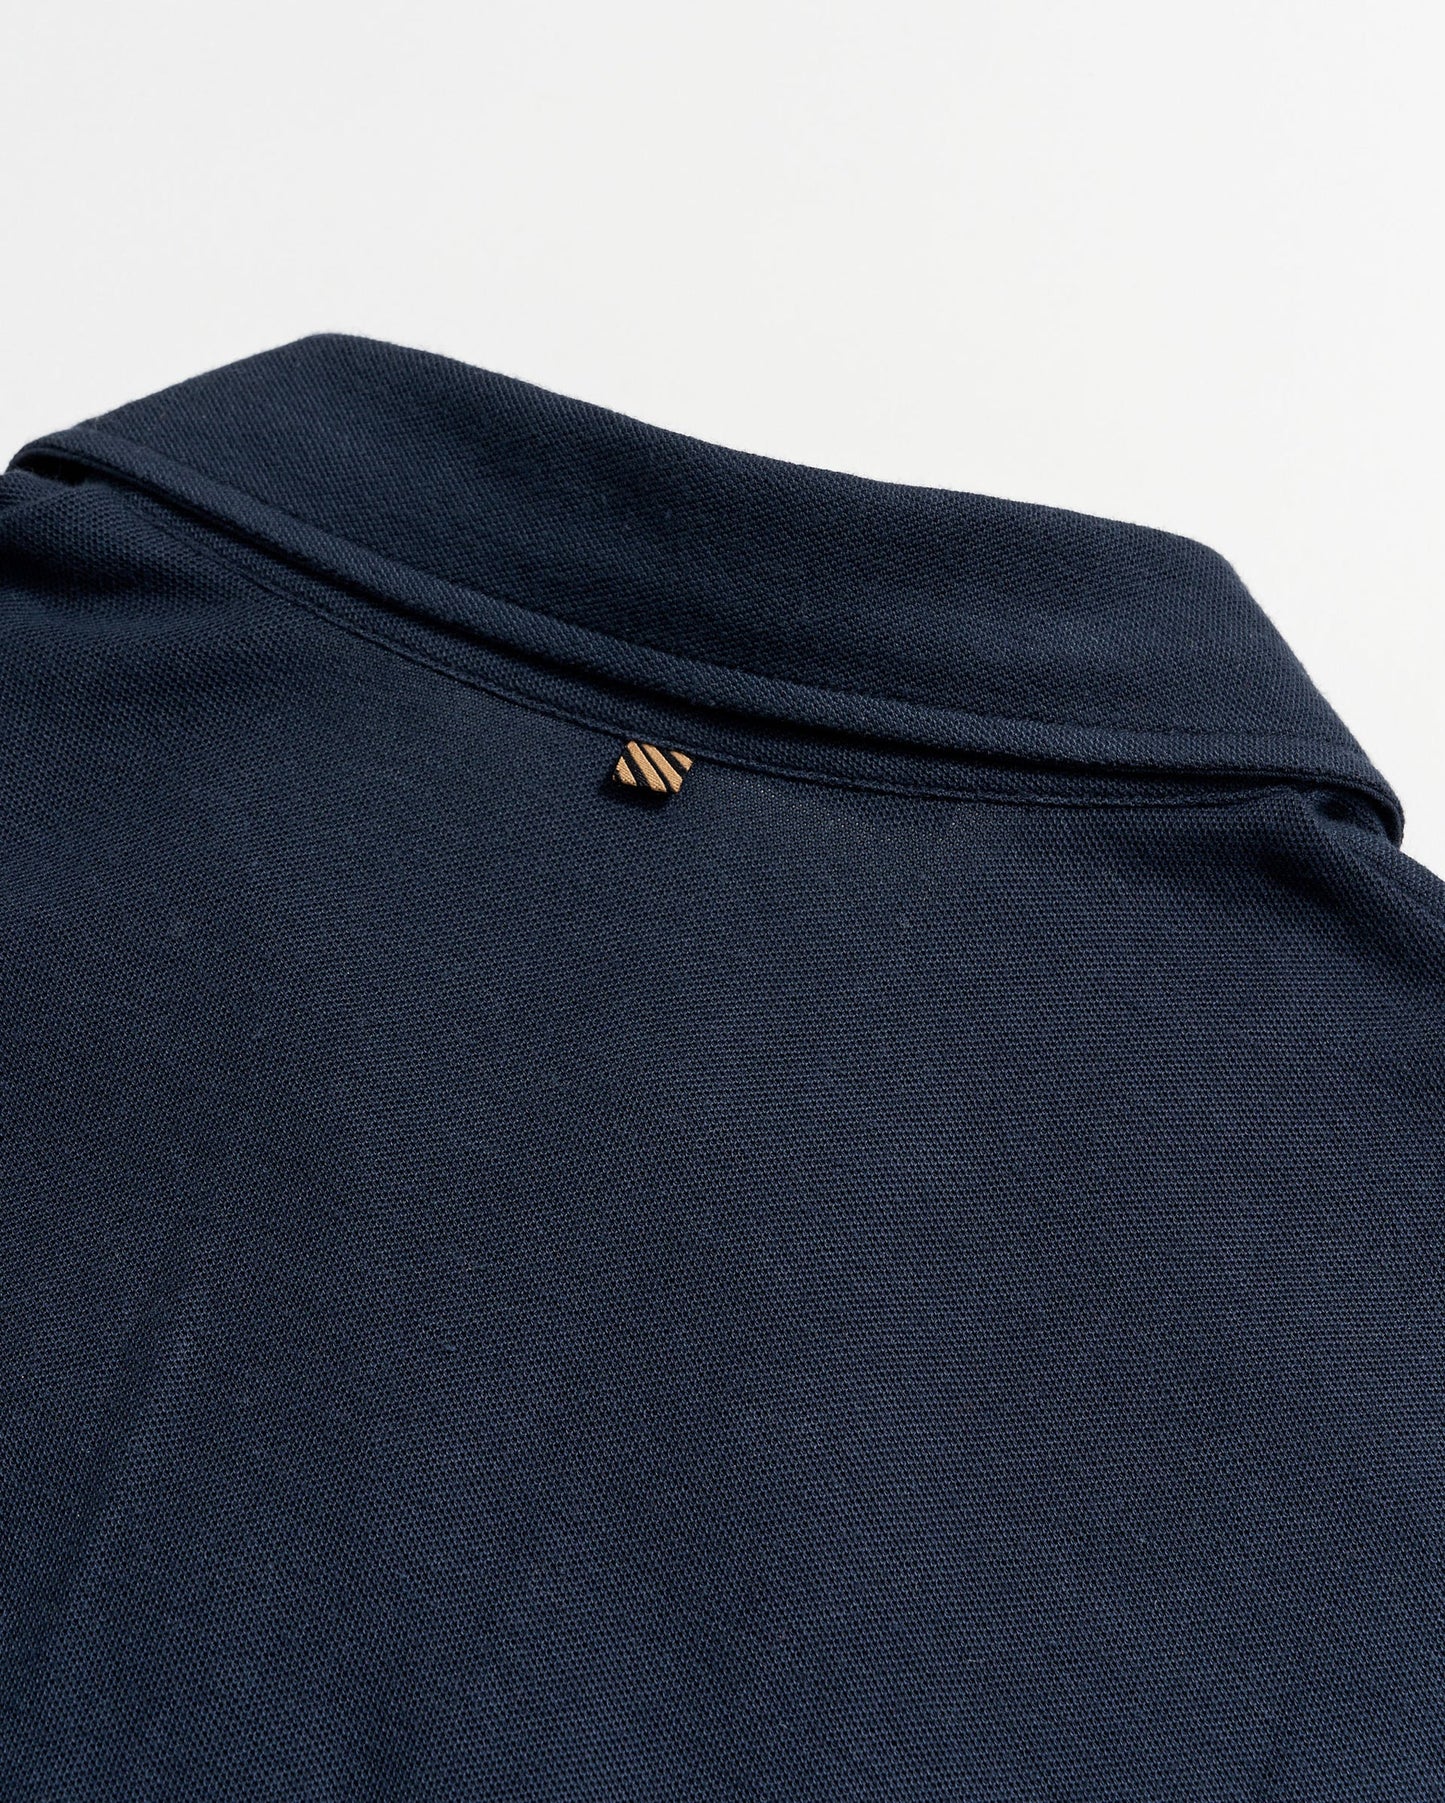 Back flat lay view of  a dark blue short sleeve polo shirt by Billy Reid